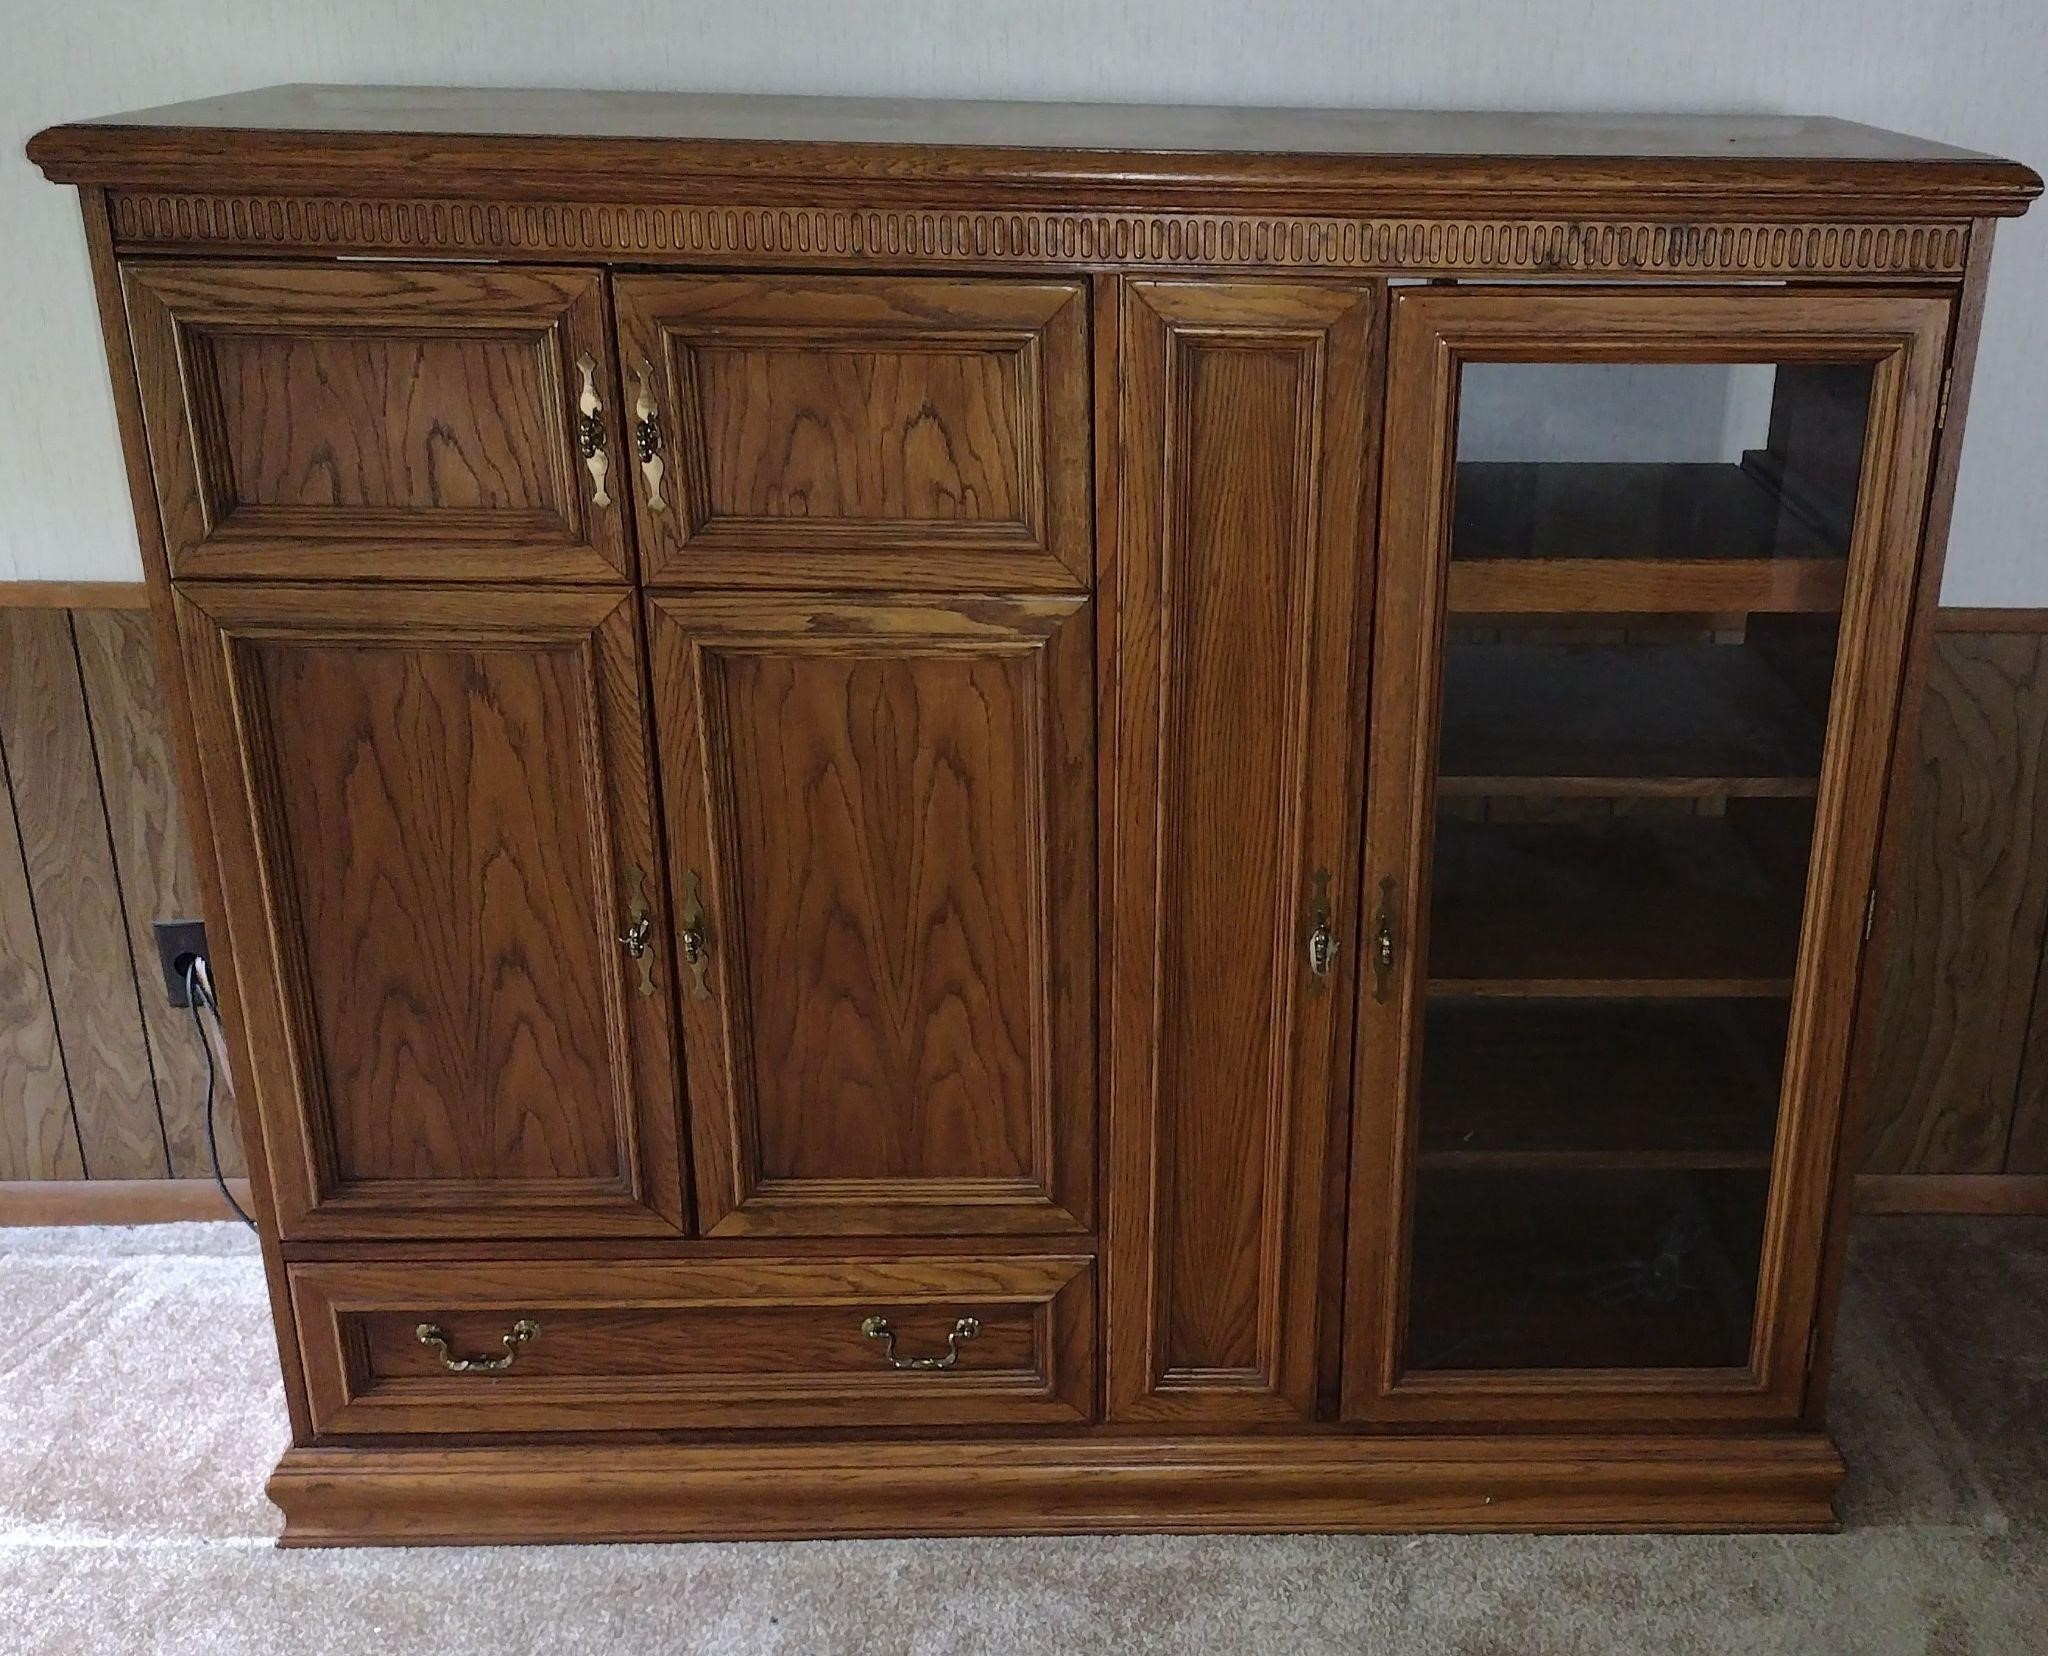 Solid Wood Entertainment Center - Like New